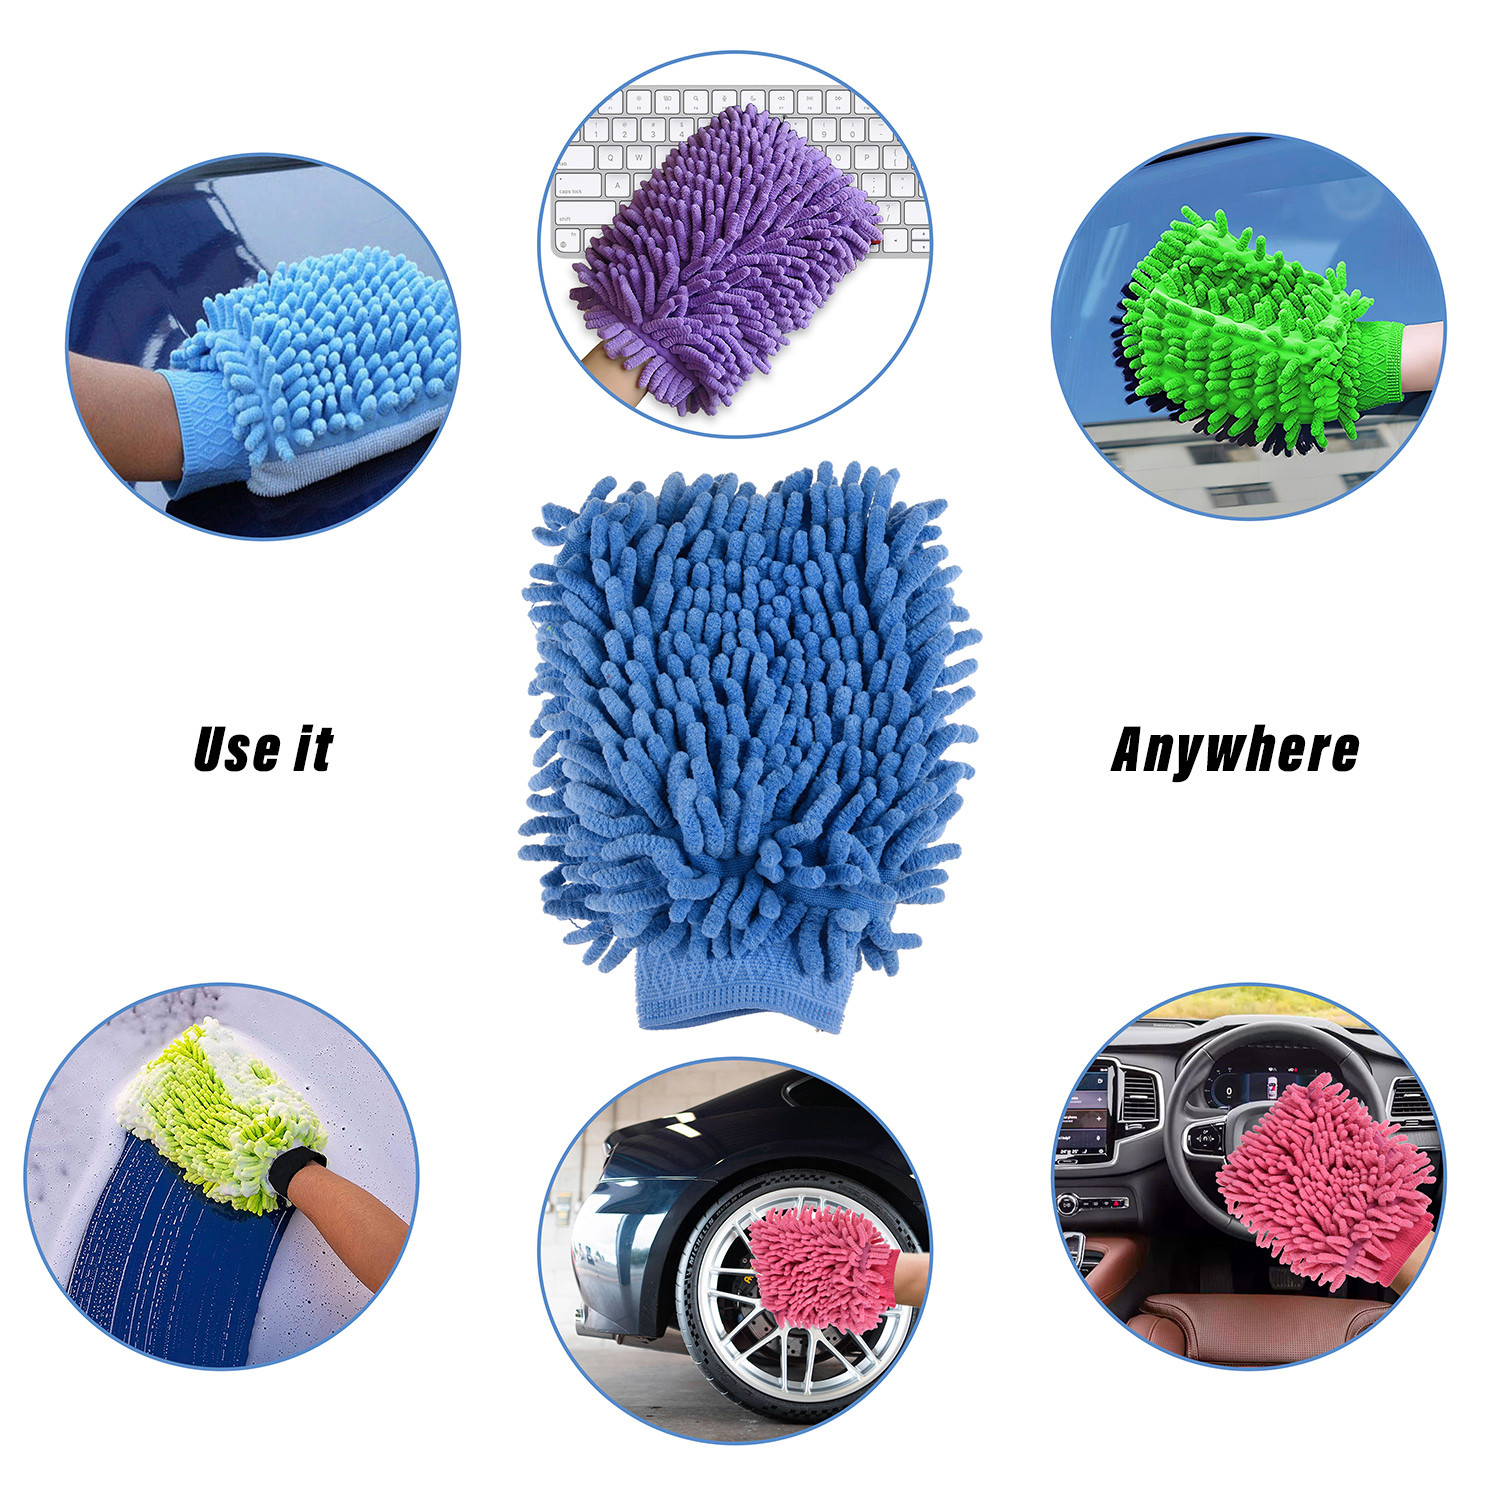 Kuber Industries Chenille Mitts|Microfiber Cleaning Gloves|Inside Waterproof Cloth Gloves|100 Gram Weighted Hand Duster|Chenille Gloves For Car|Glass|Pack of 2 (Green & Blue)